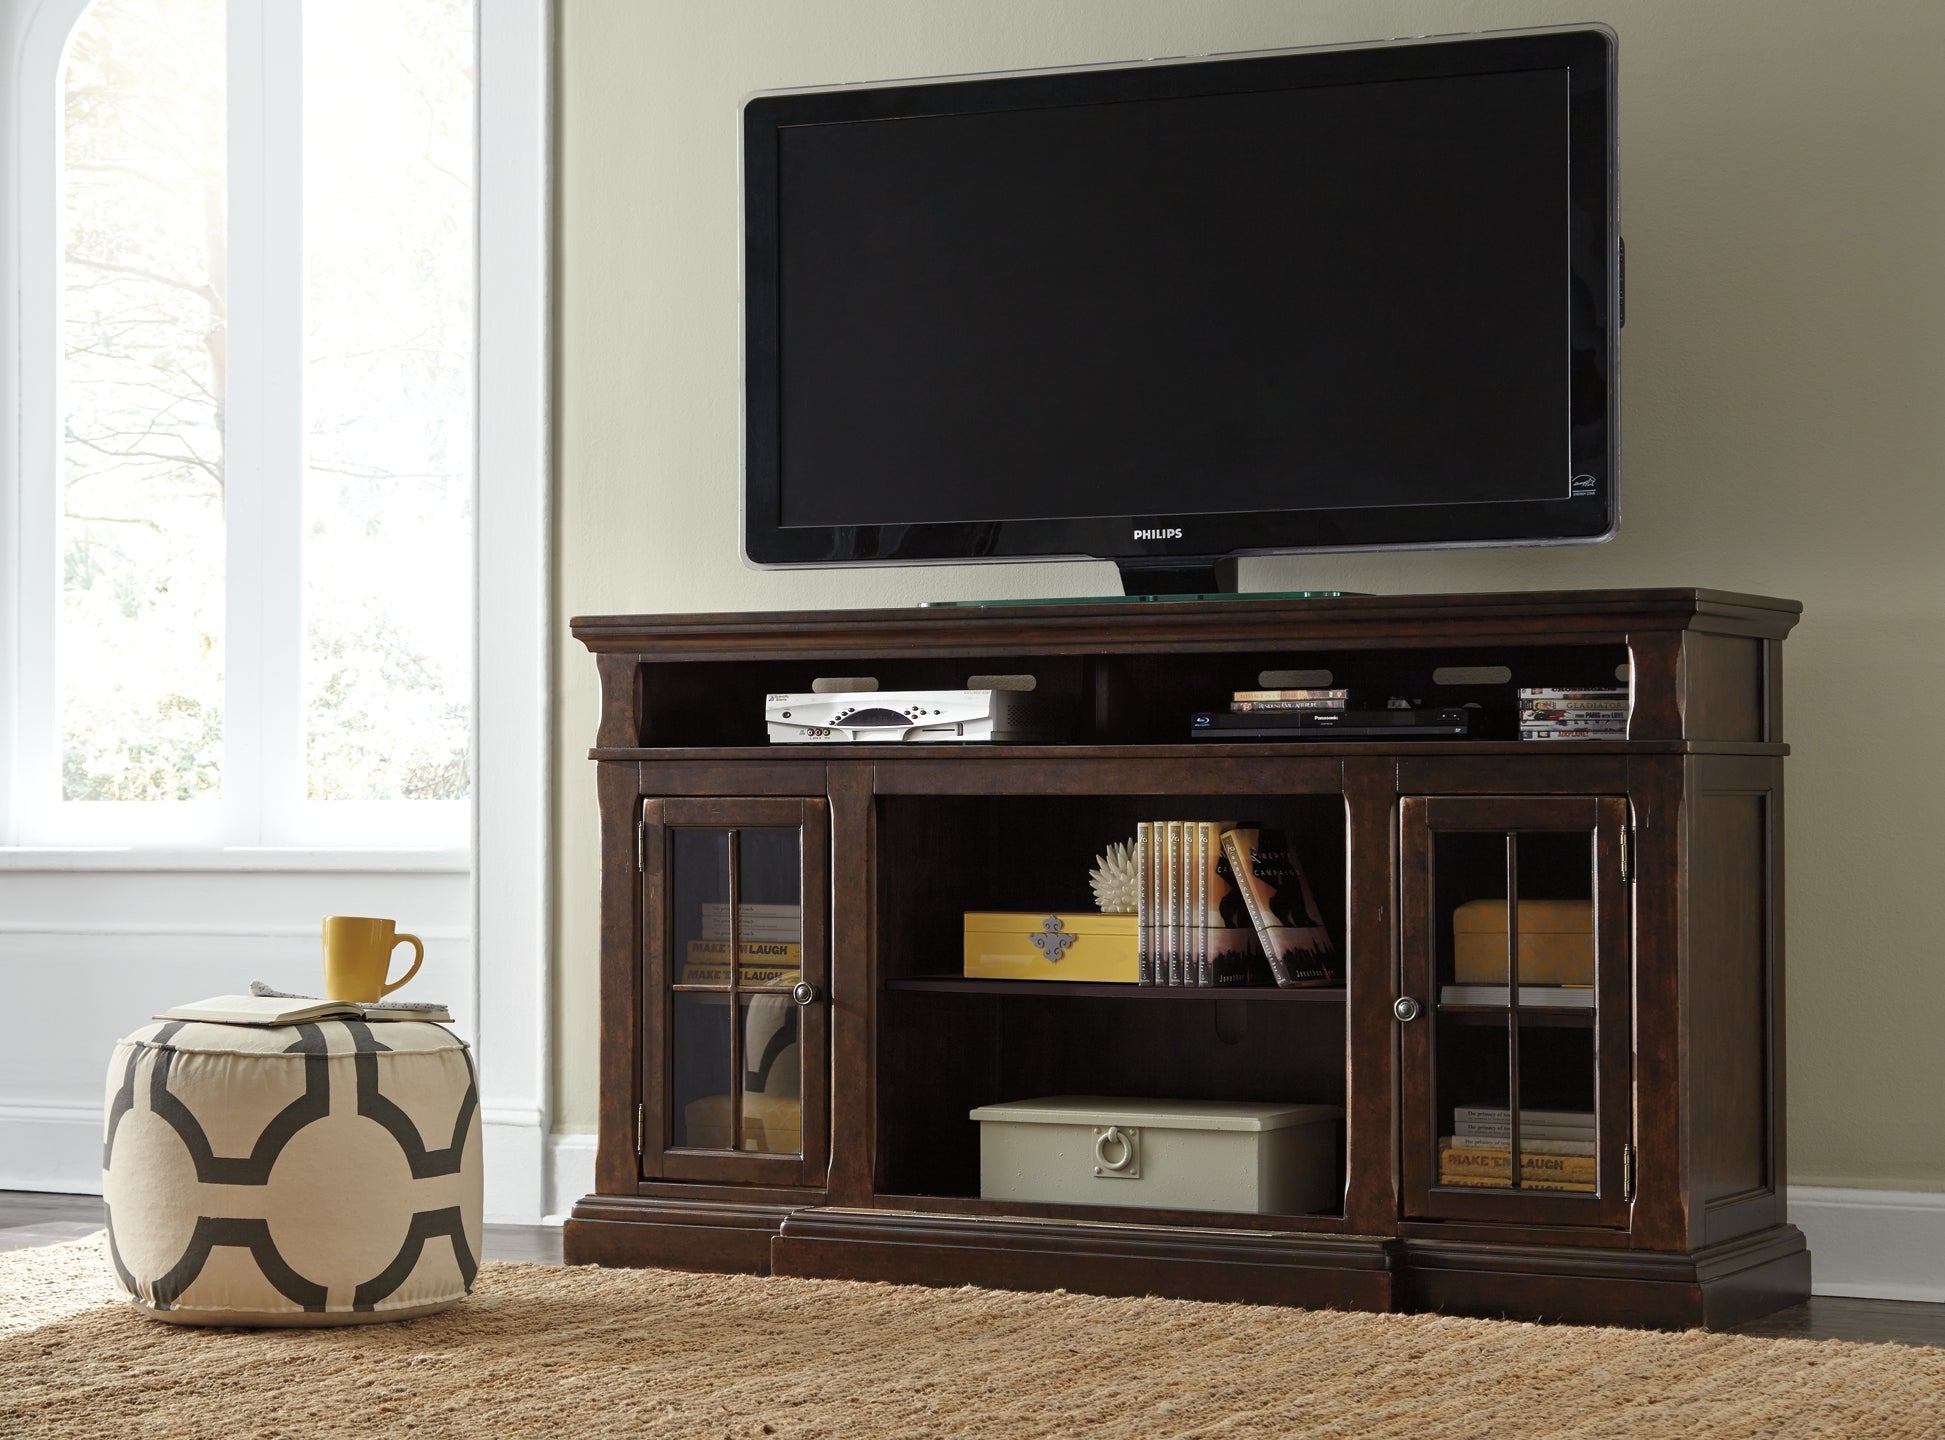 Roddinton XL TV Stand w/Fireplace Option at Walker Mattress and Furniture Locations in Cedar Park and Belton TX.